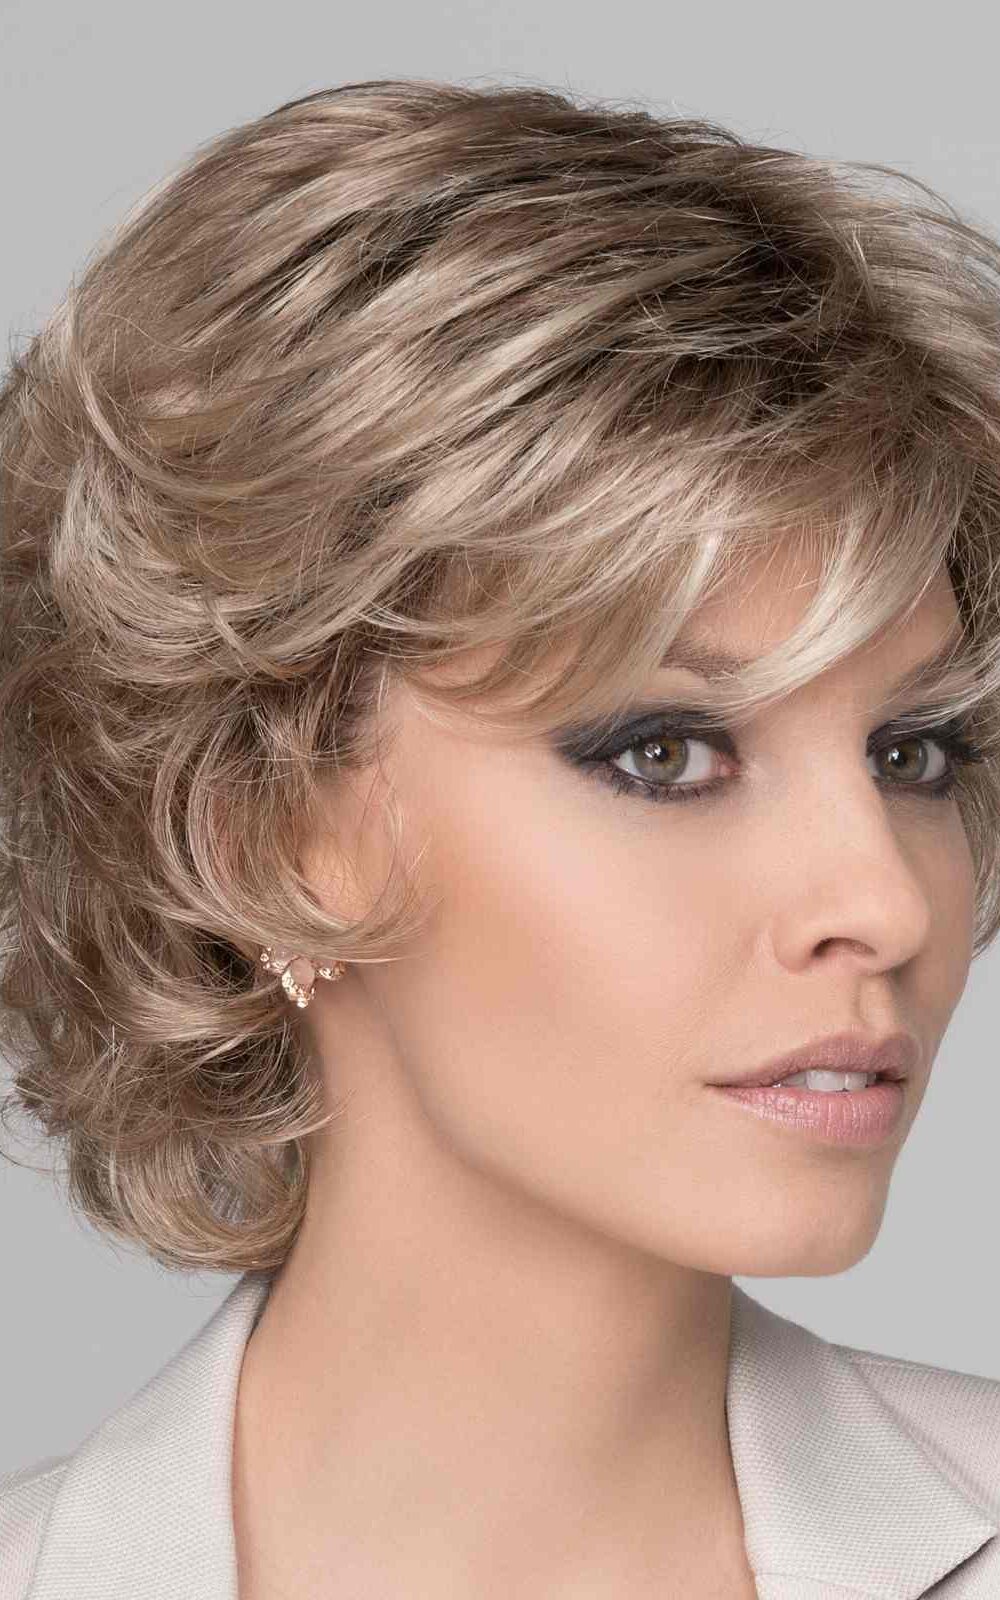 Daily Large Wig by Ellen Wille | CHAMPAGNE ROOTED | Light Beige Blonde, Medium Honey Blonde, and Platinum Blonde Blend with Dark Roots